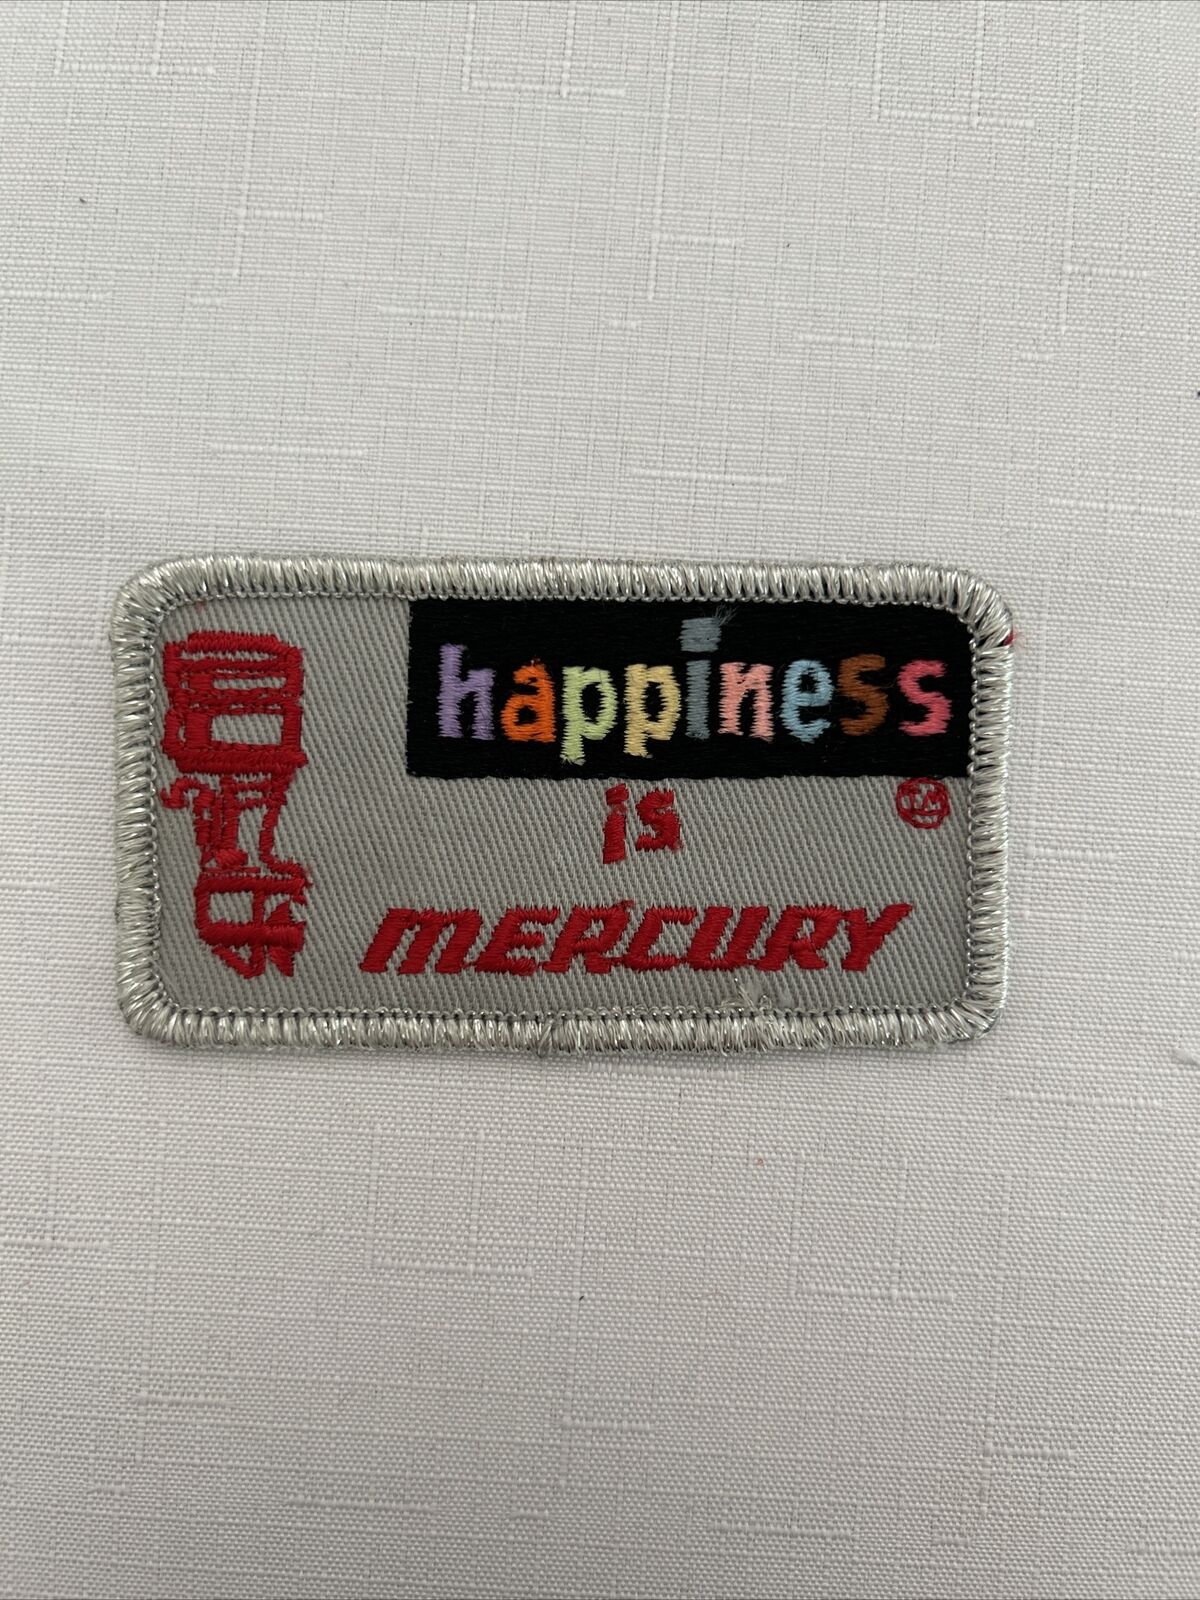 Vtg c 1960s-70s Boat Boating HAPPINESS IS MERCURY OUTBOARD MOTORS Ad Patch 00XJ